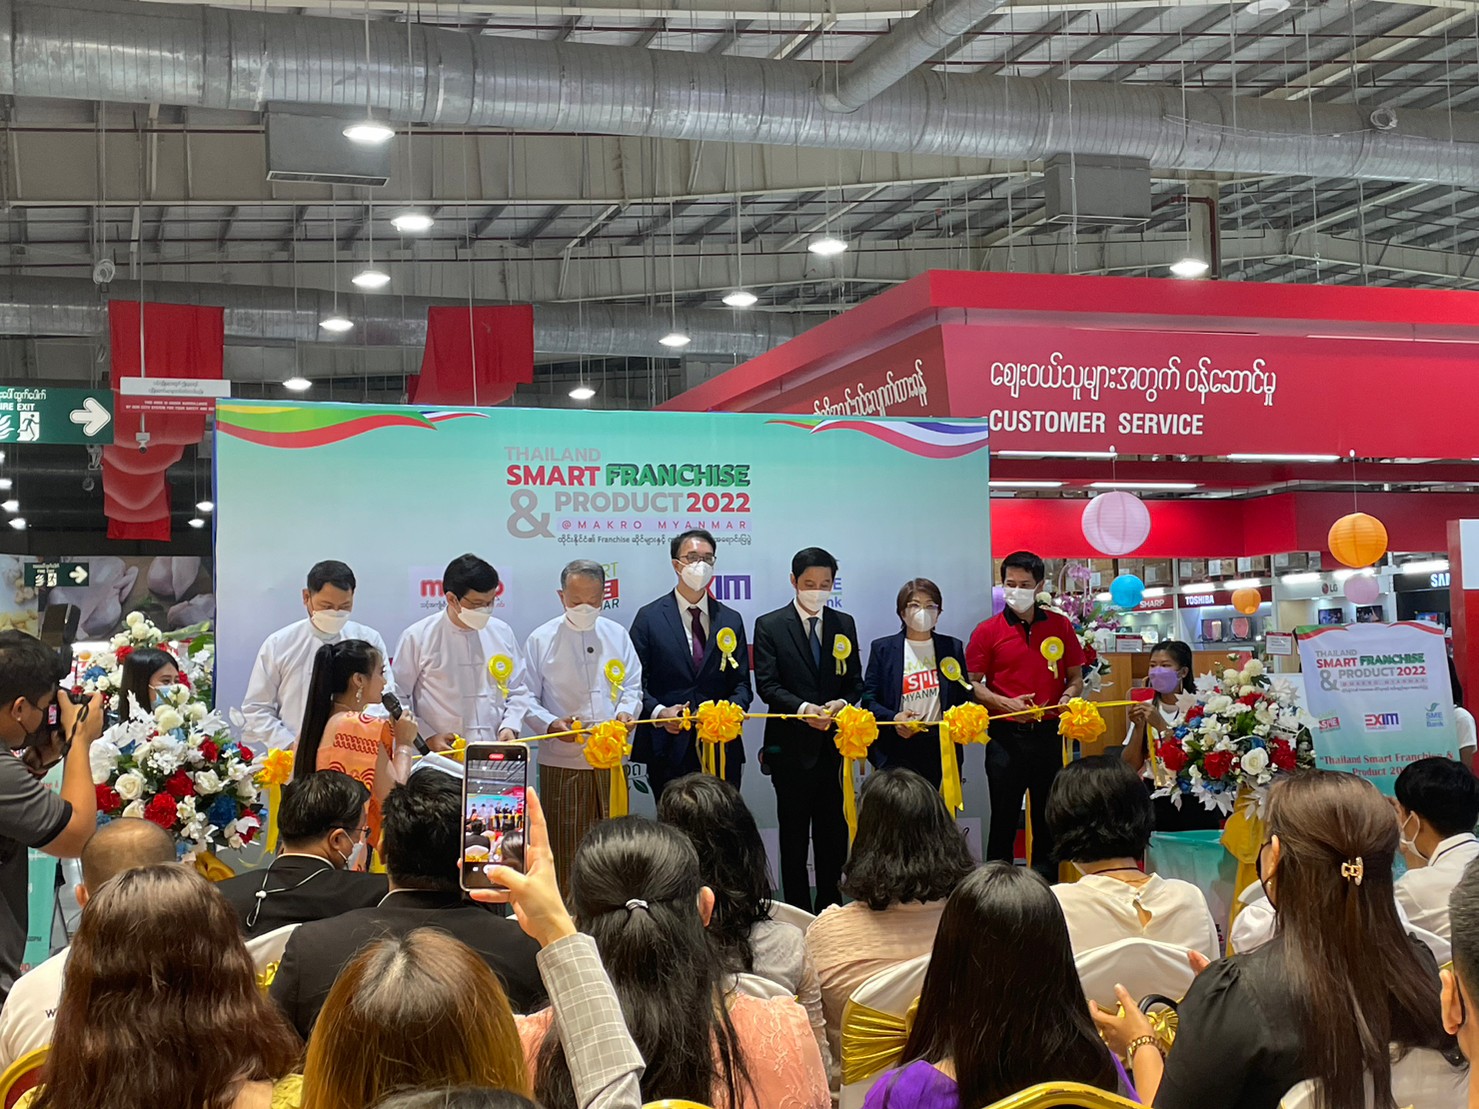 The Opening Ceremony of Thai Trade Fair "Thailand Smart Franchise & Product 2022"